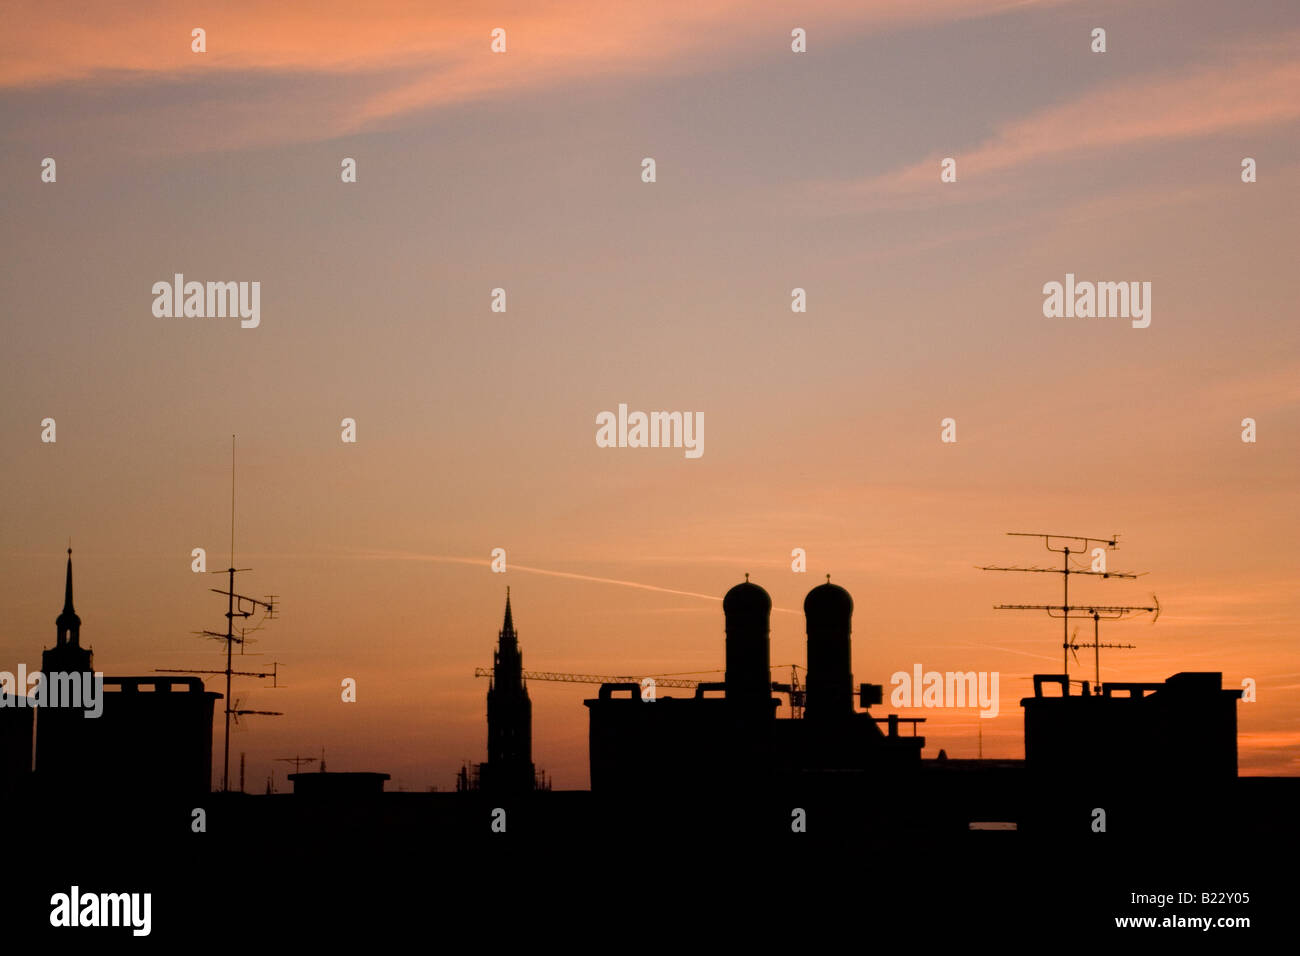 Sunset over Munich, Germany. The twin towers of the Frauenkirche can be clearly seen (right of centre). Stock Photo